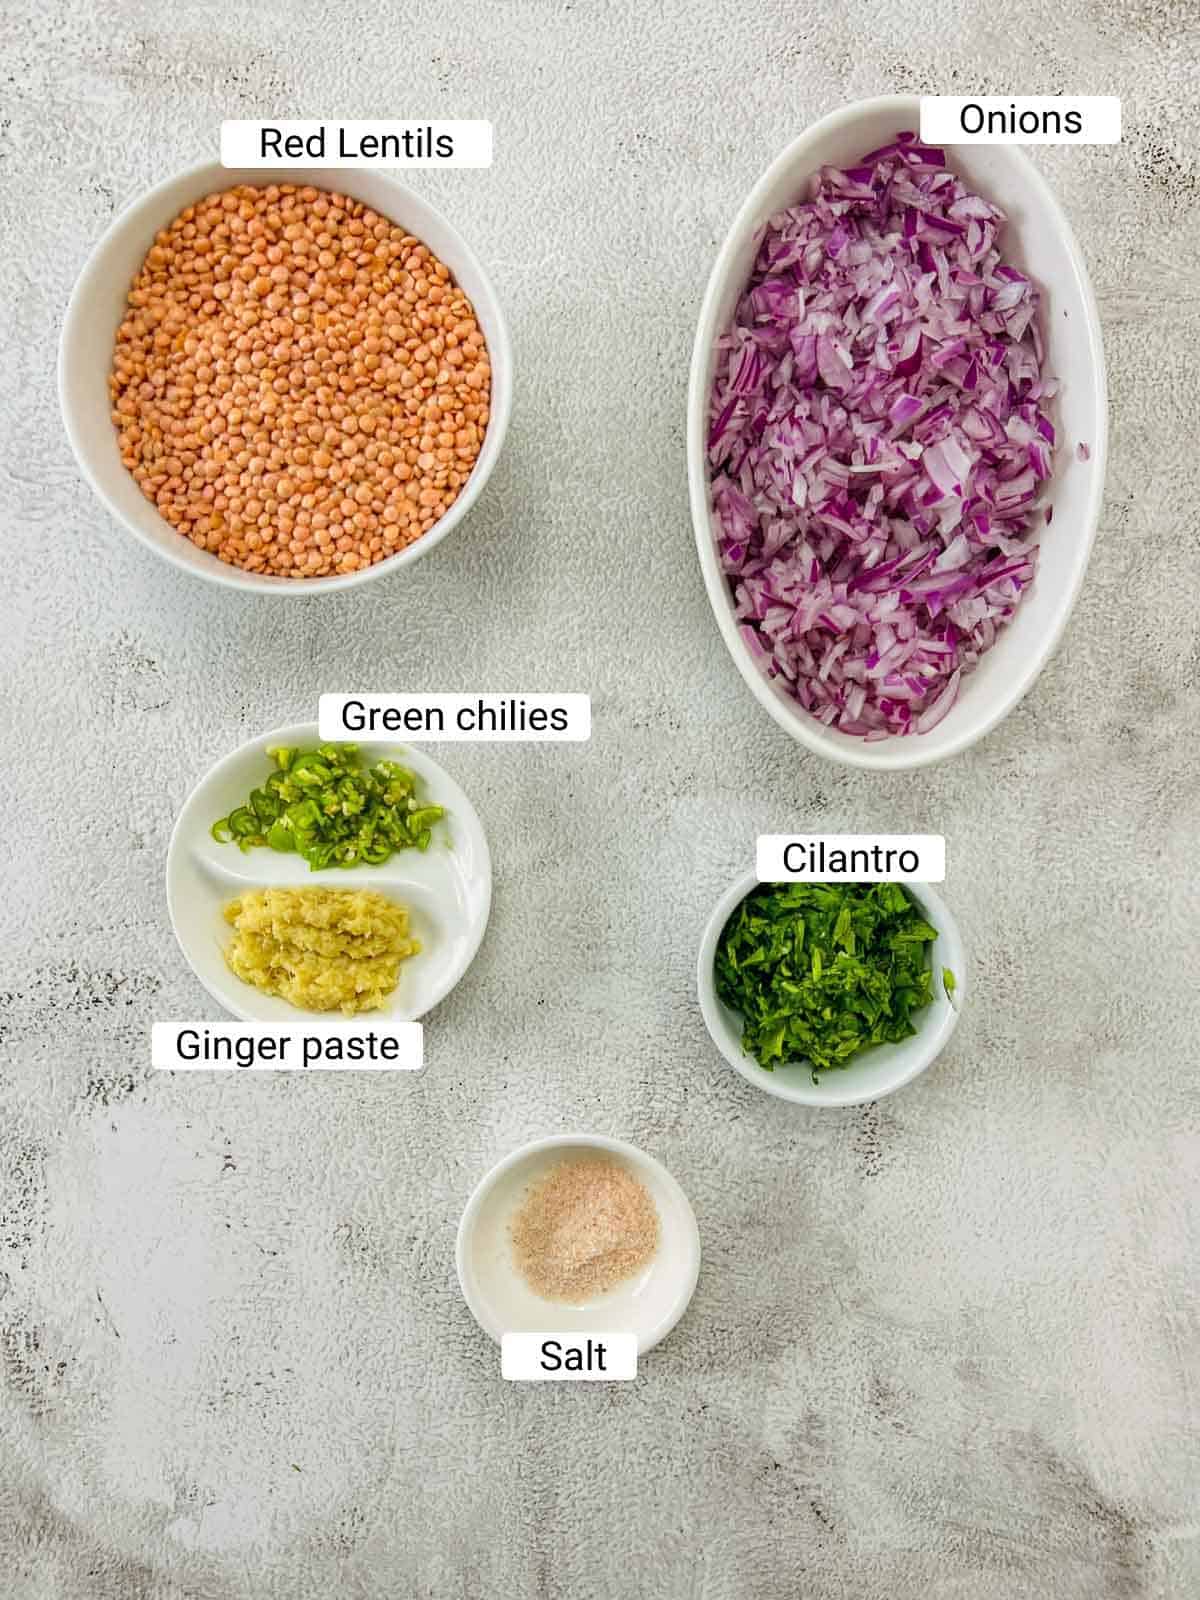 Ingredients to make red lentil fritters on a white surface.